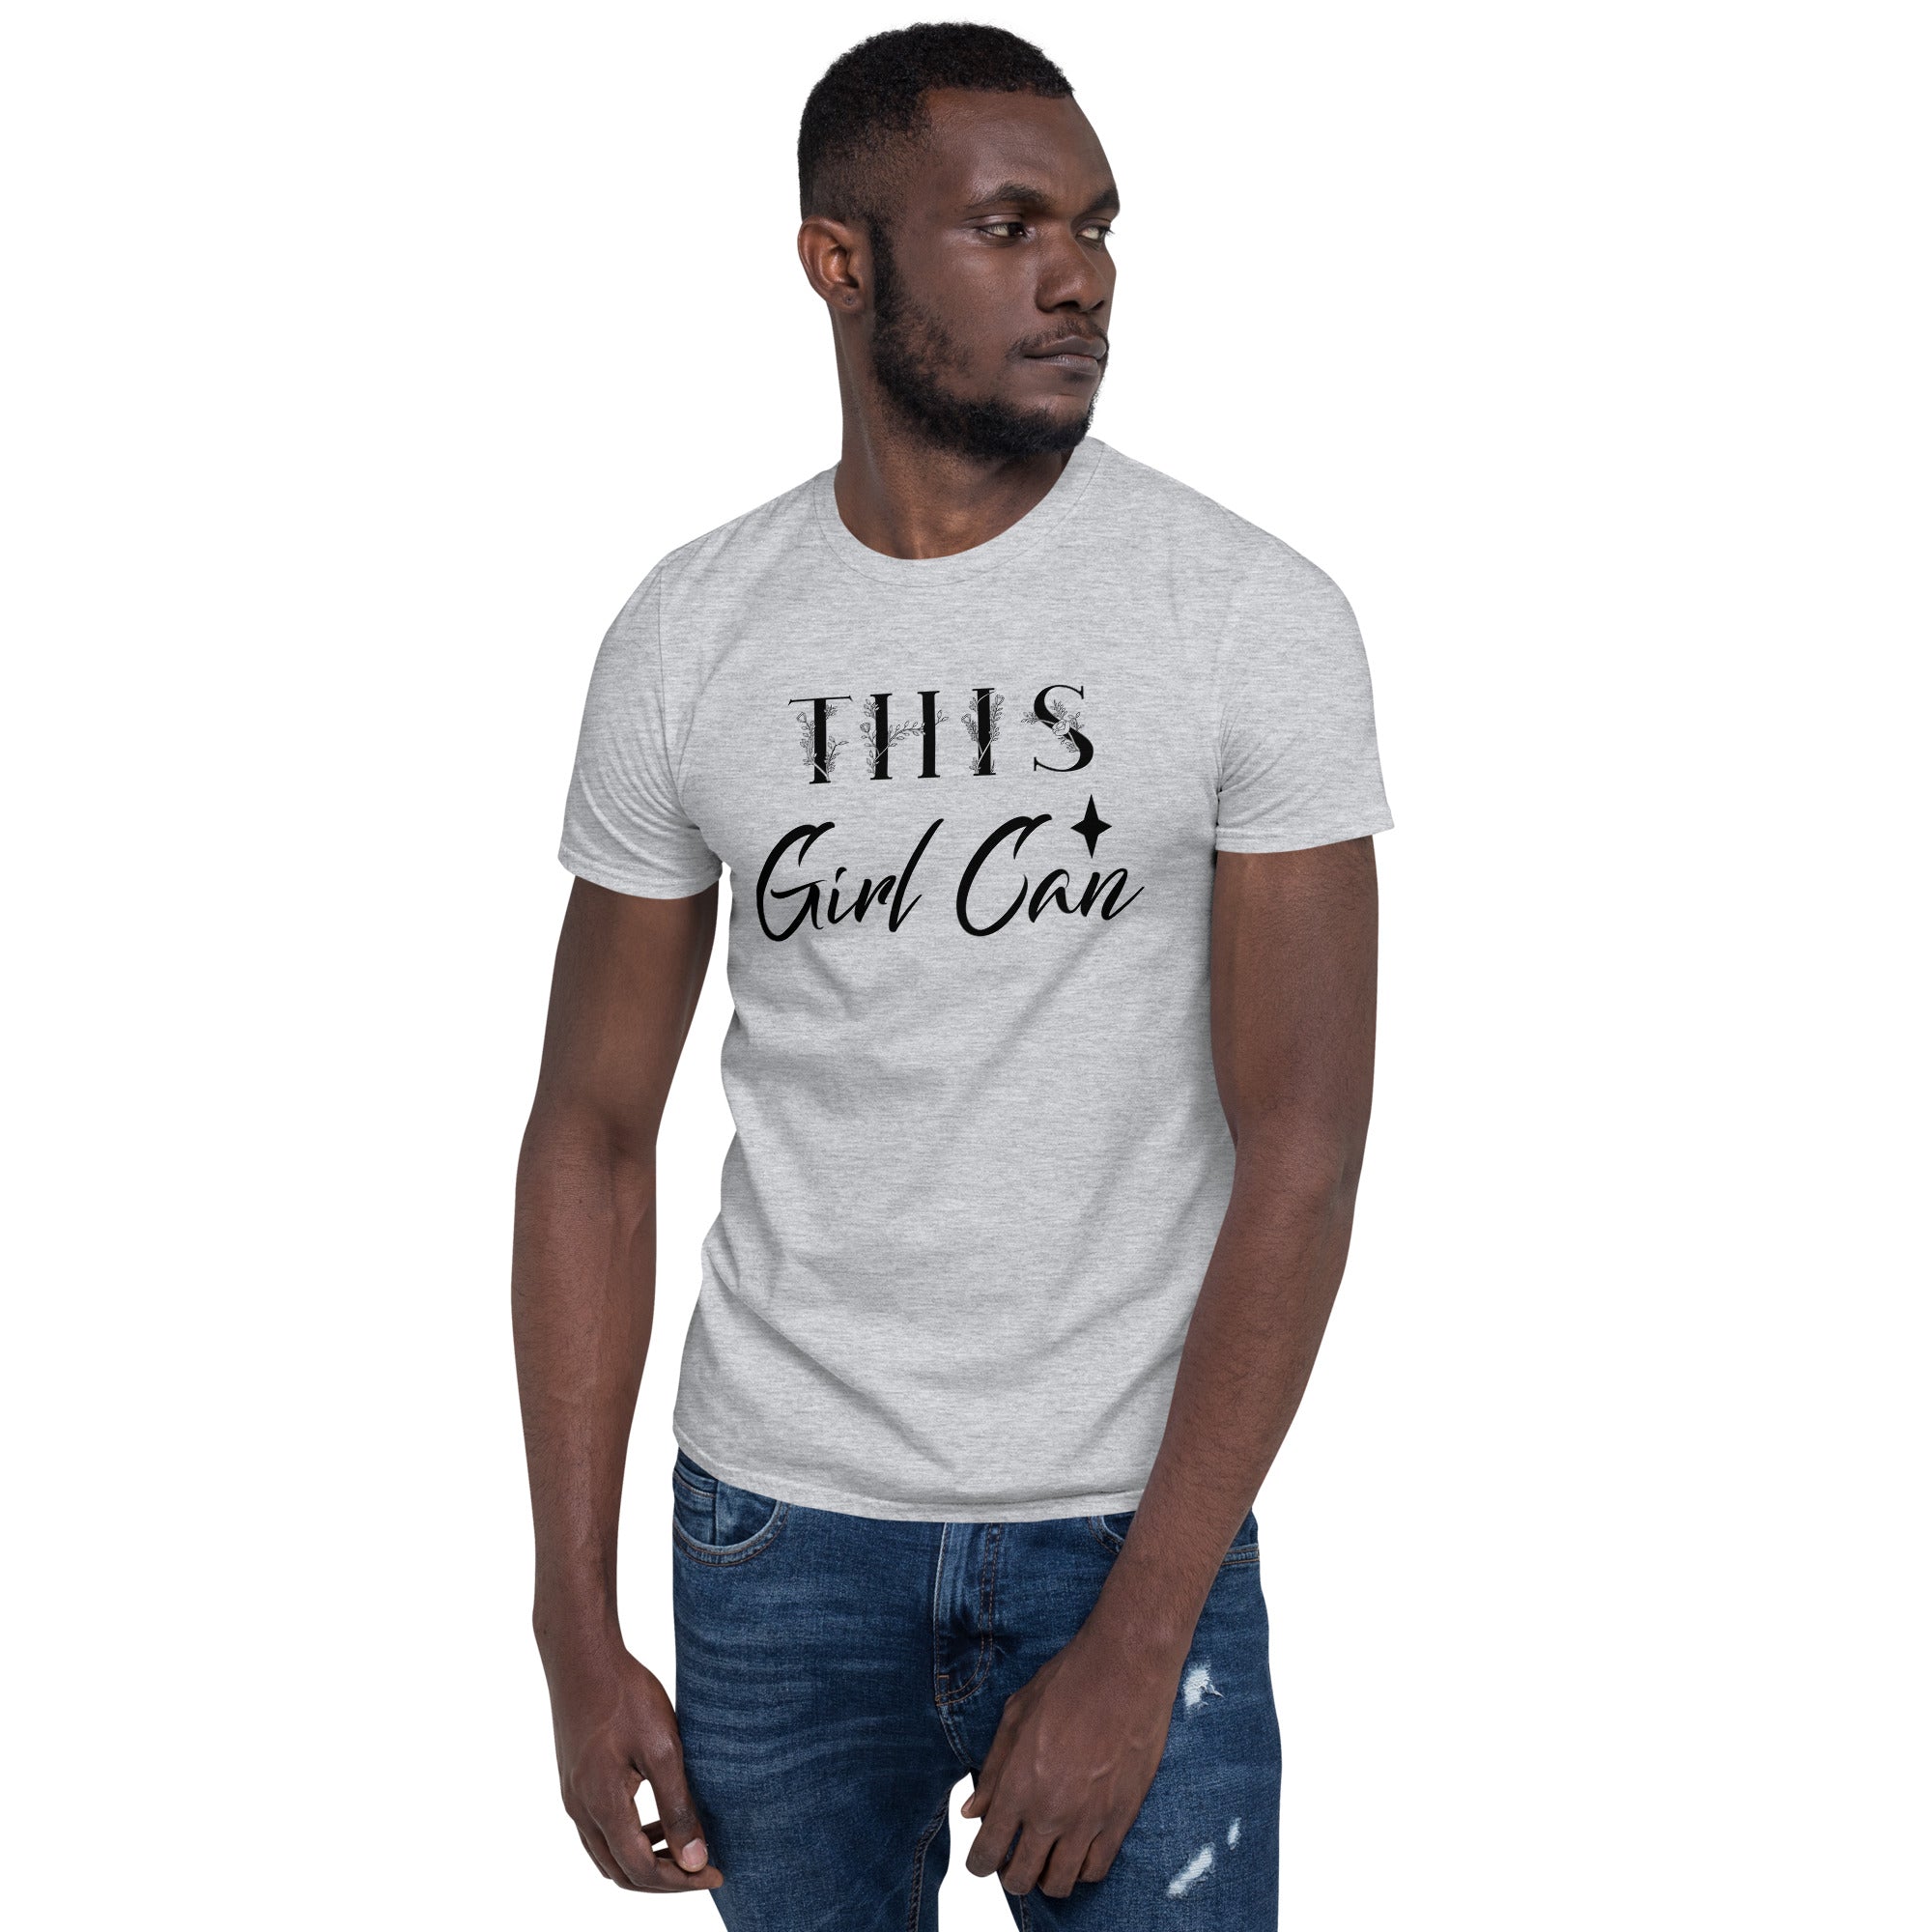 This Girl Can - Short-Sleeve Unisex T-Shirt